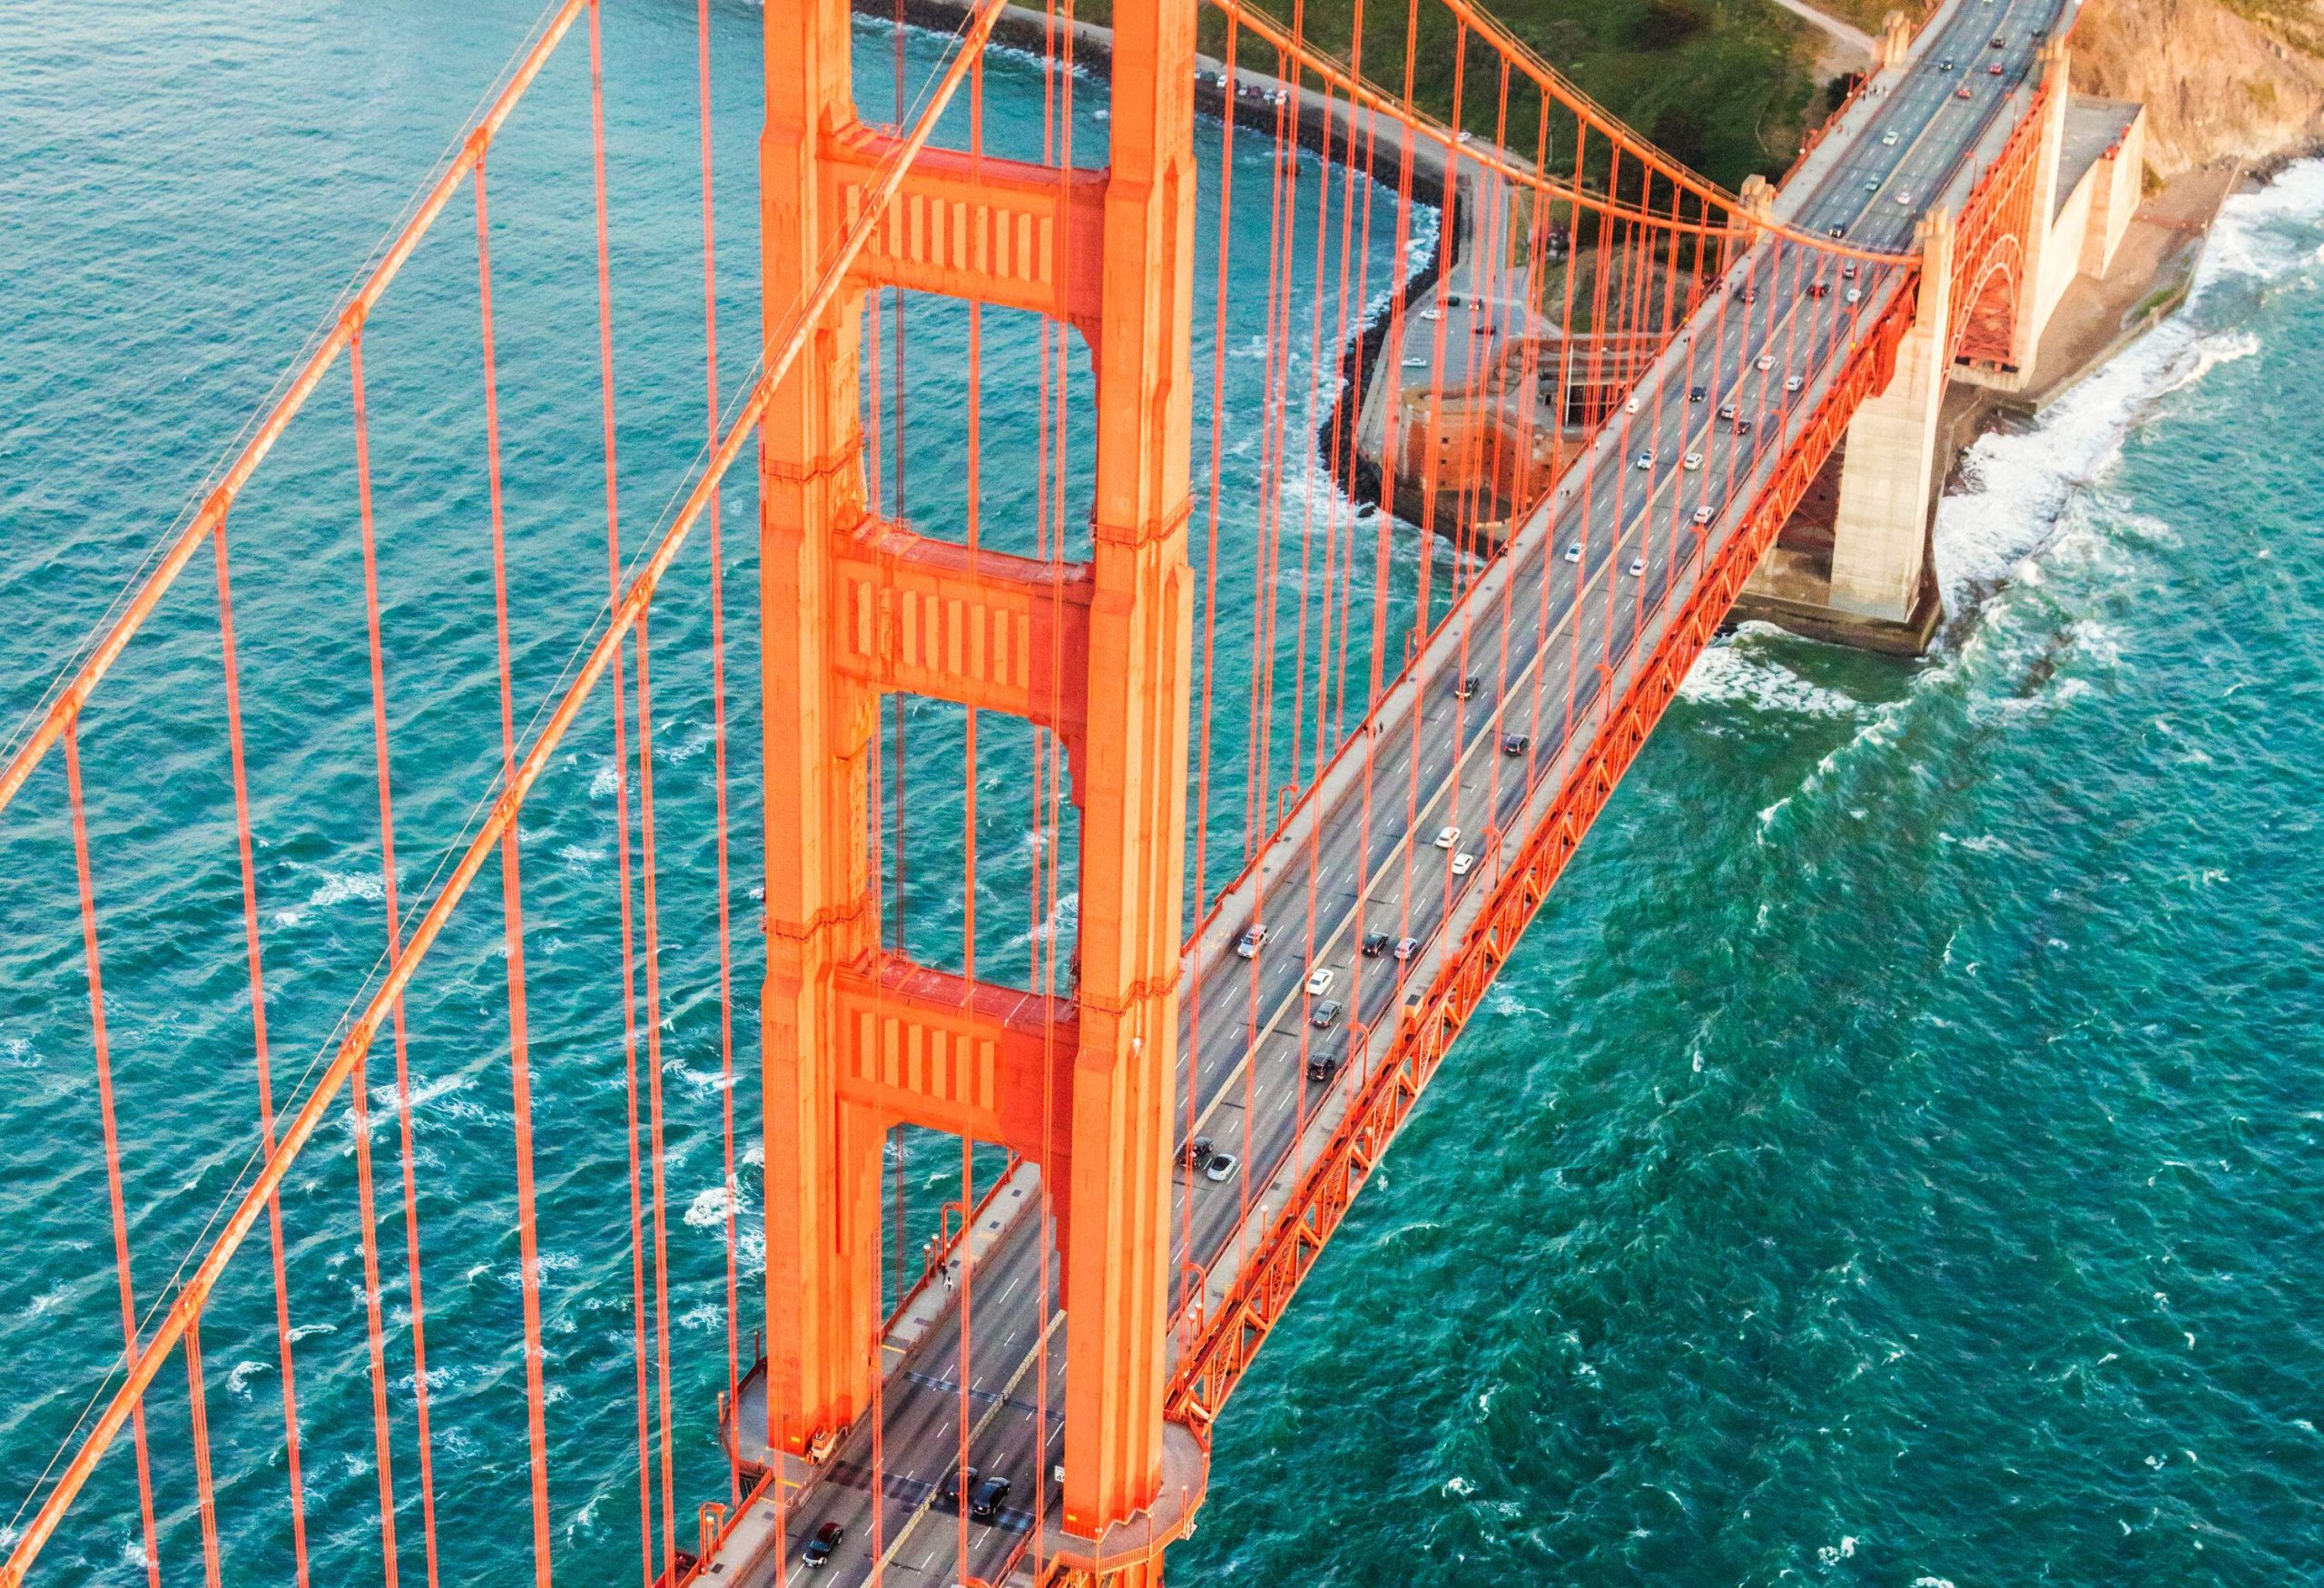 The aerial view of the Golden Gate Bridge in San Francisco, California.